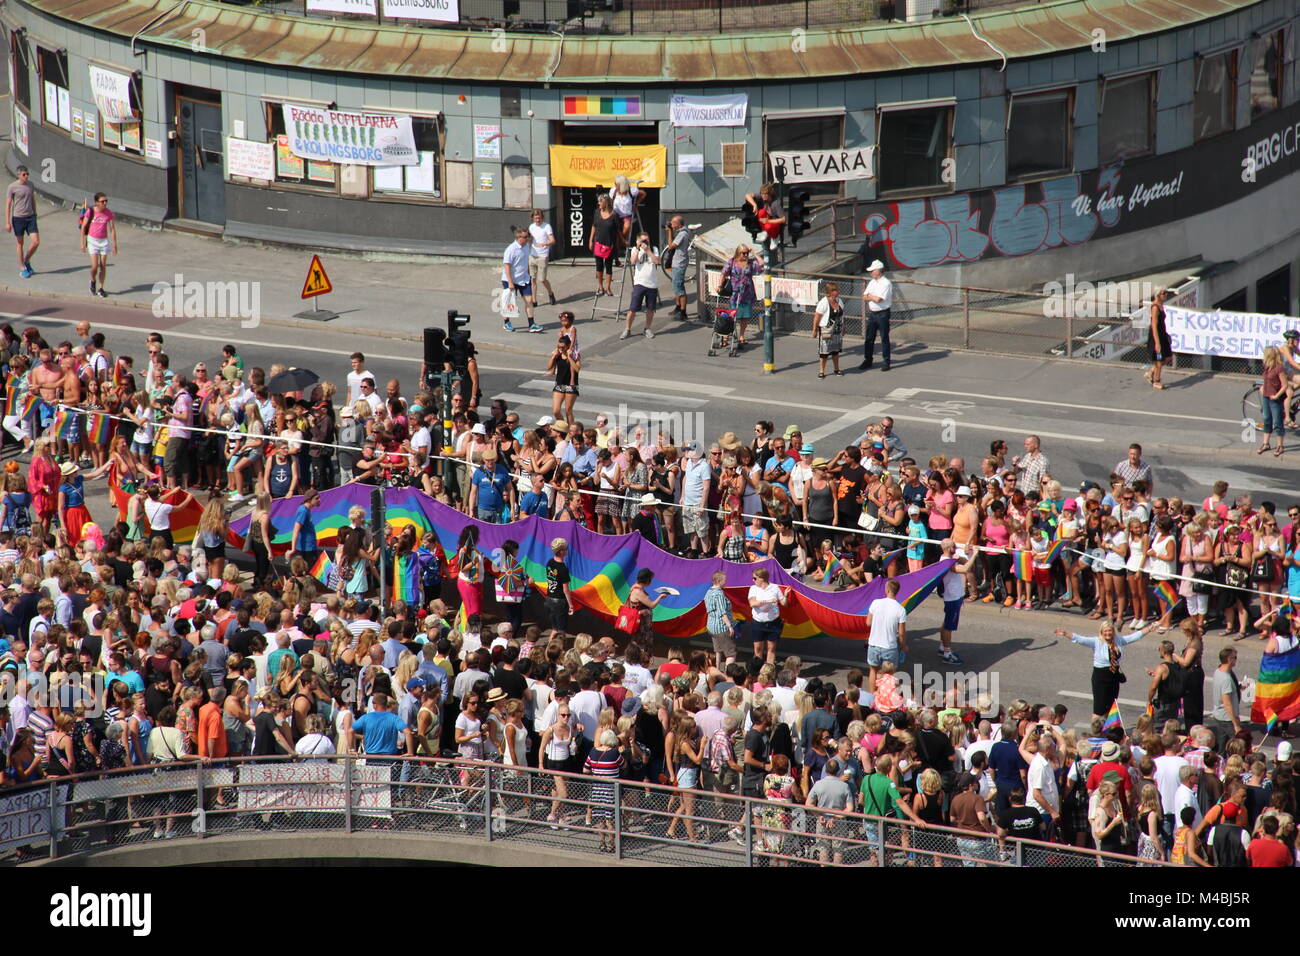 Aerial view of old traffic point Slussen during the Stockholm Pride Parade in August 2014, seen from Katarinahissen. Stock Photo